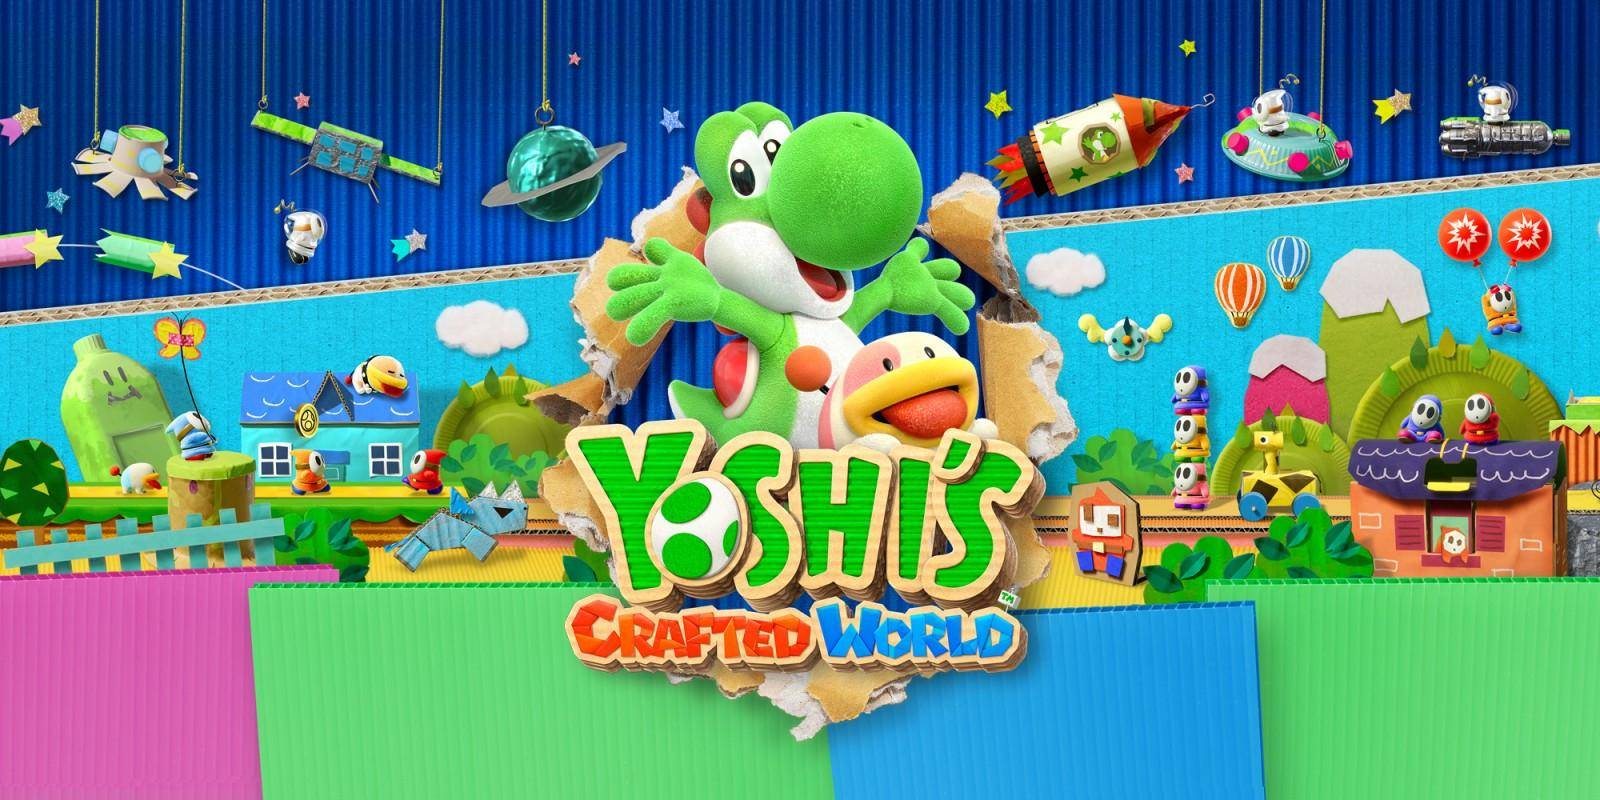 Yoshi’s Crafted World dévoile son gameplay en vidéo